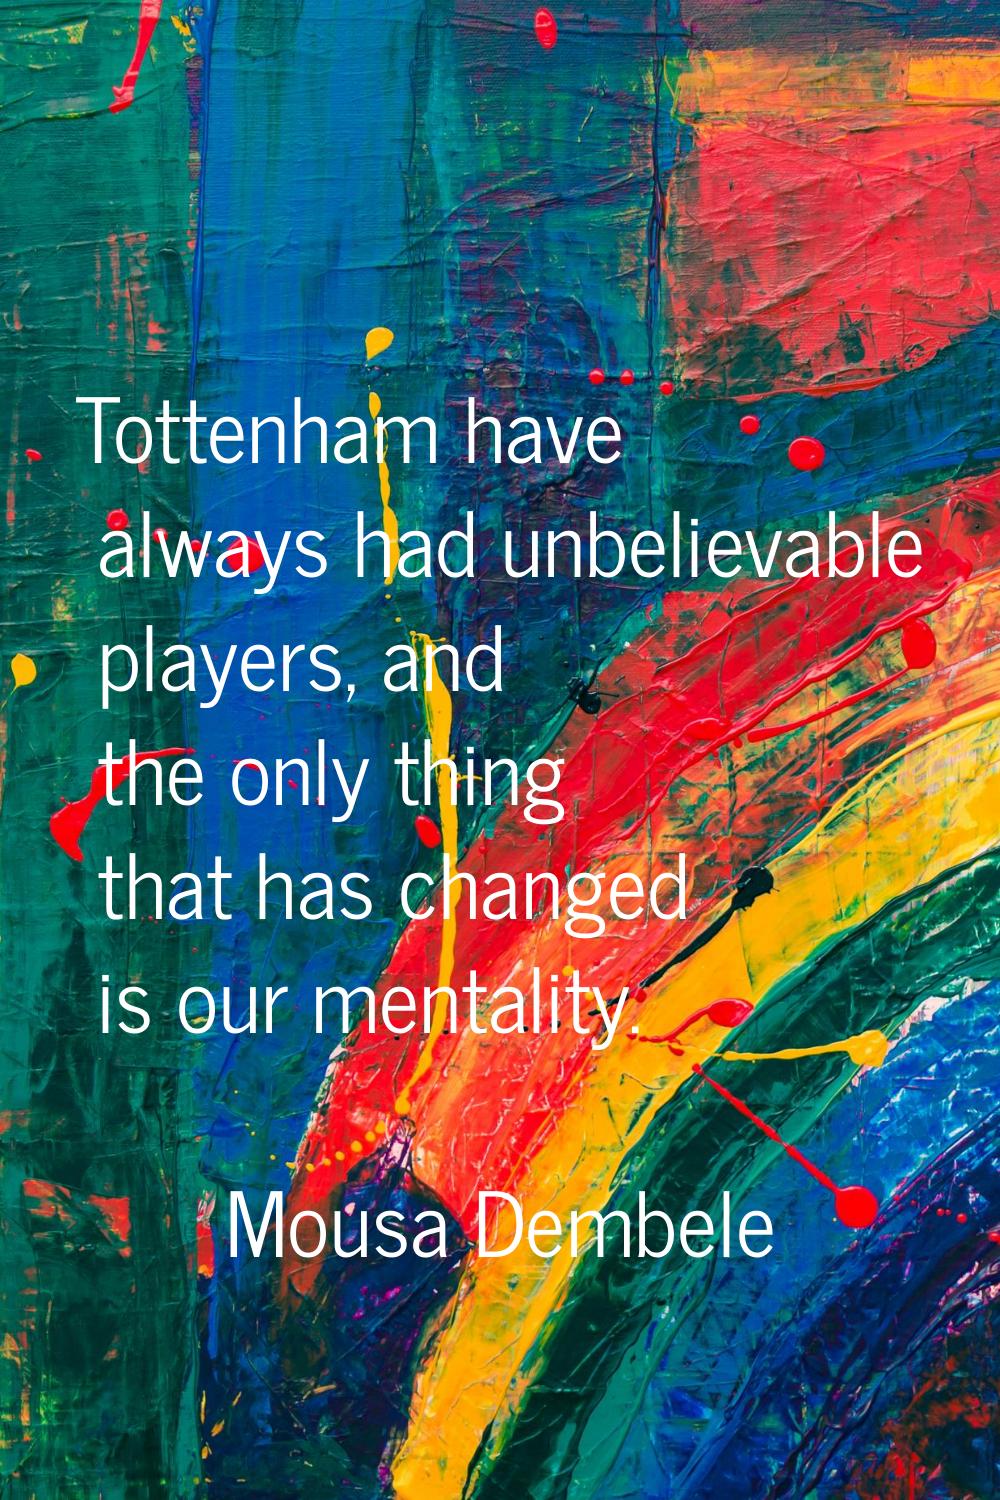 Tottenham have always had unbelievable players, and the only thing that has changed is our mentalit